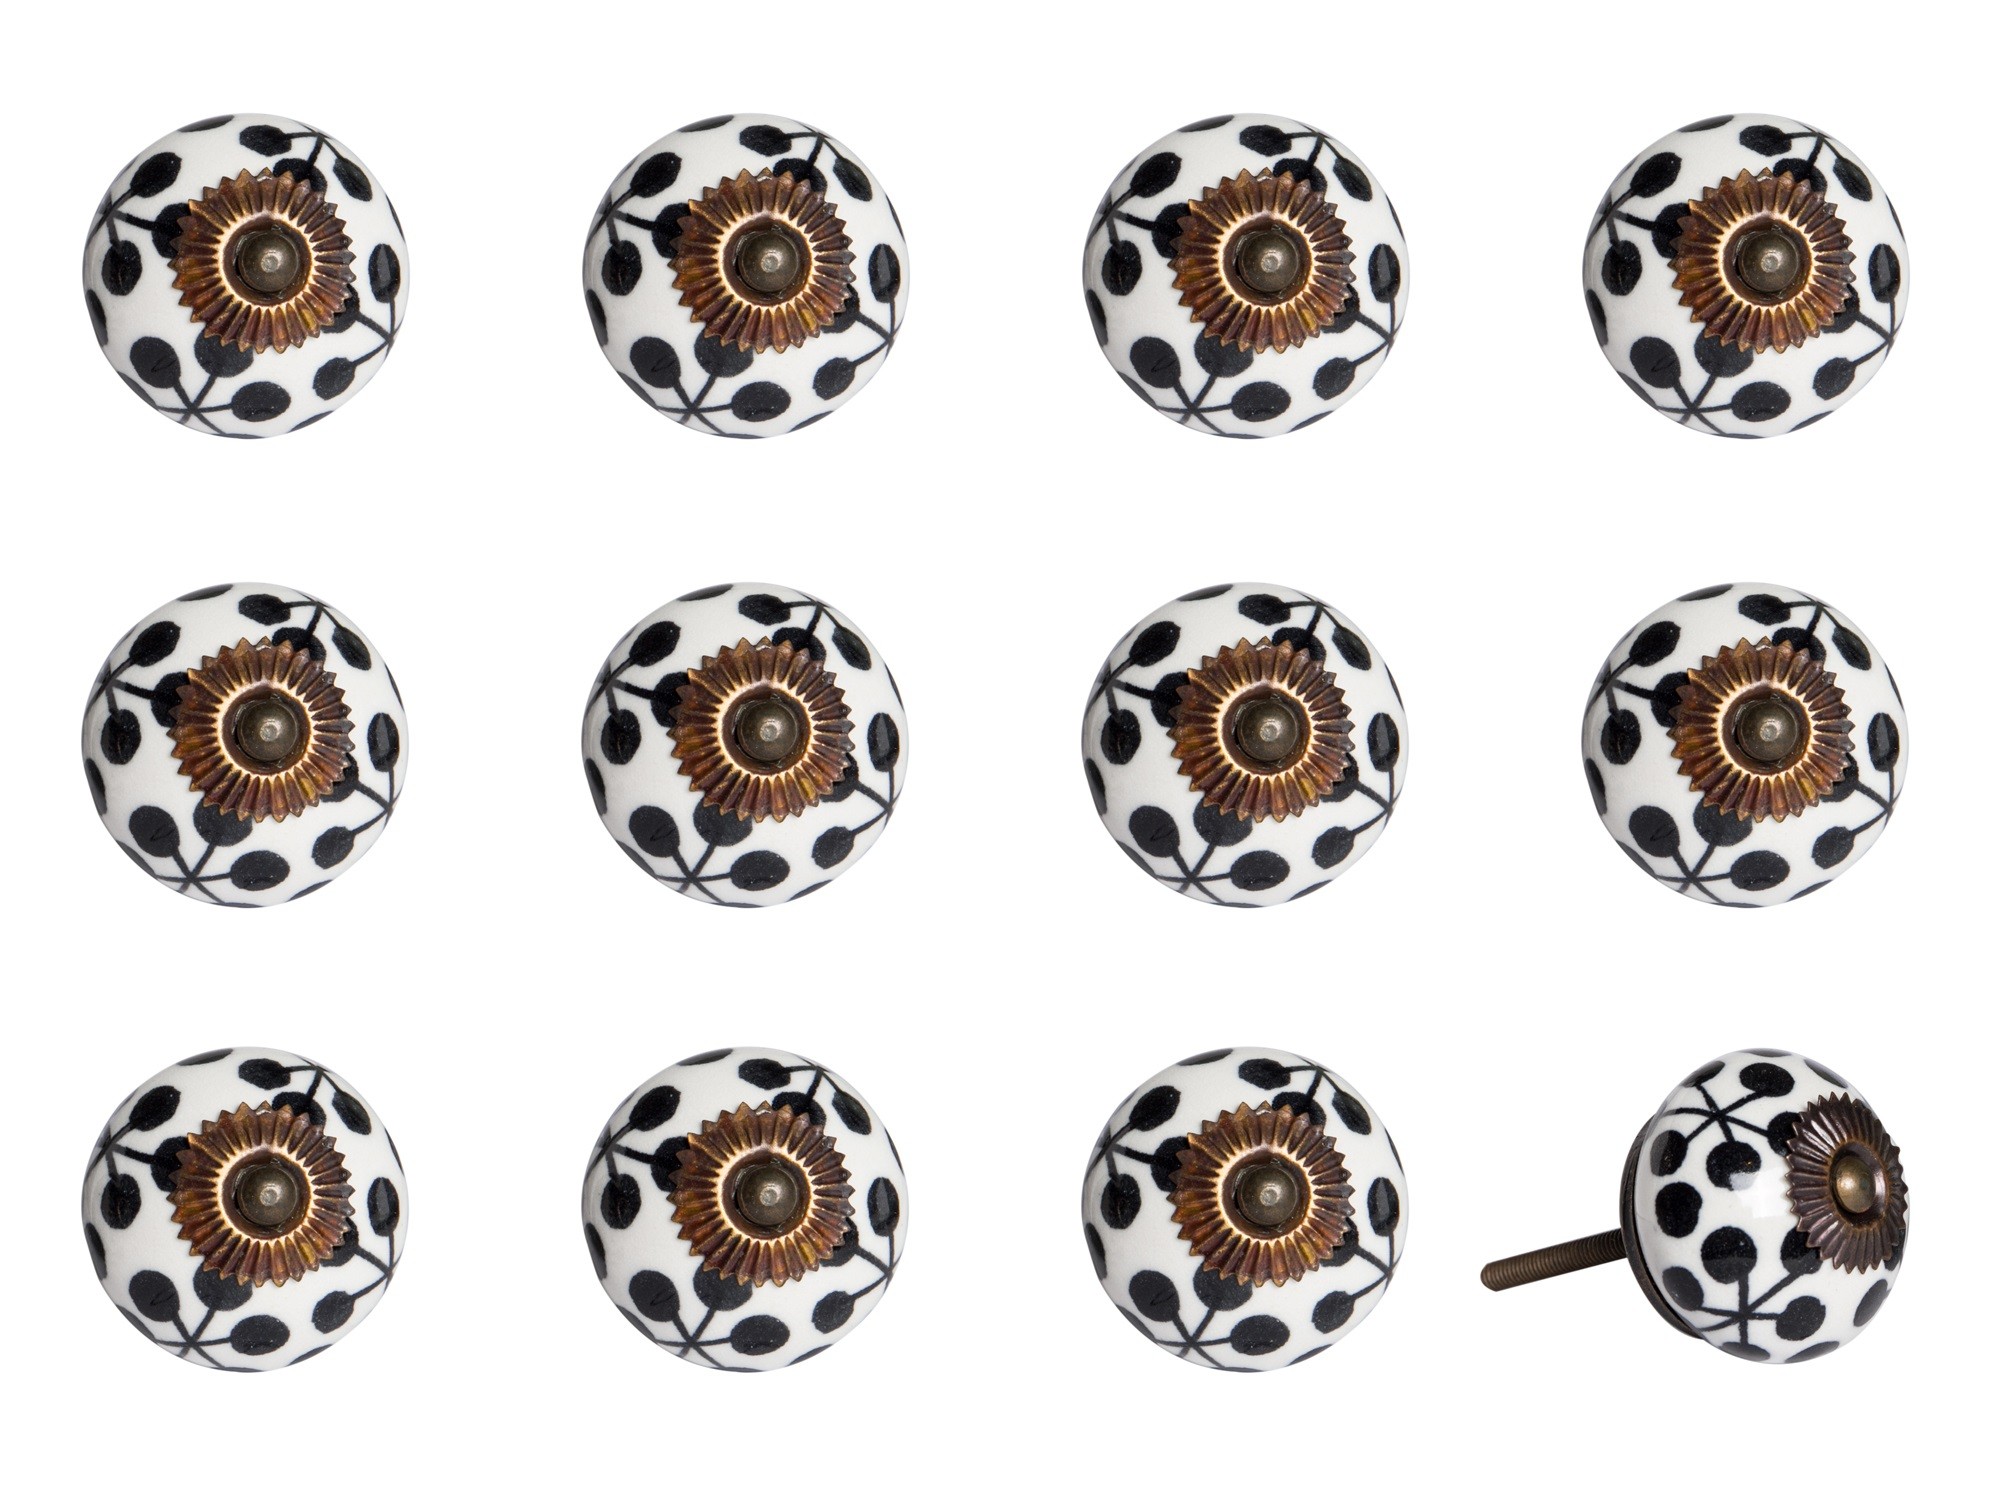 1.5" x 1.5" x 1.5" Black, White and Cooper- Knobs 12-Pack